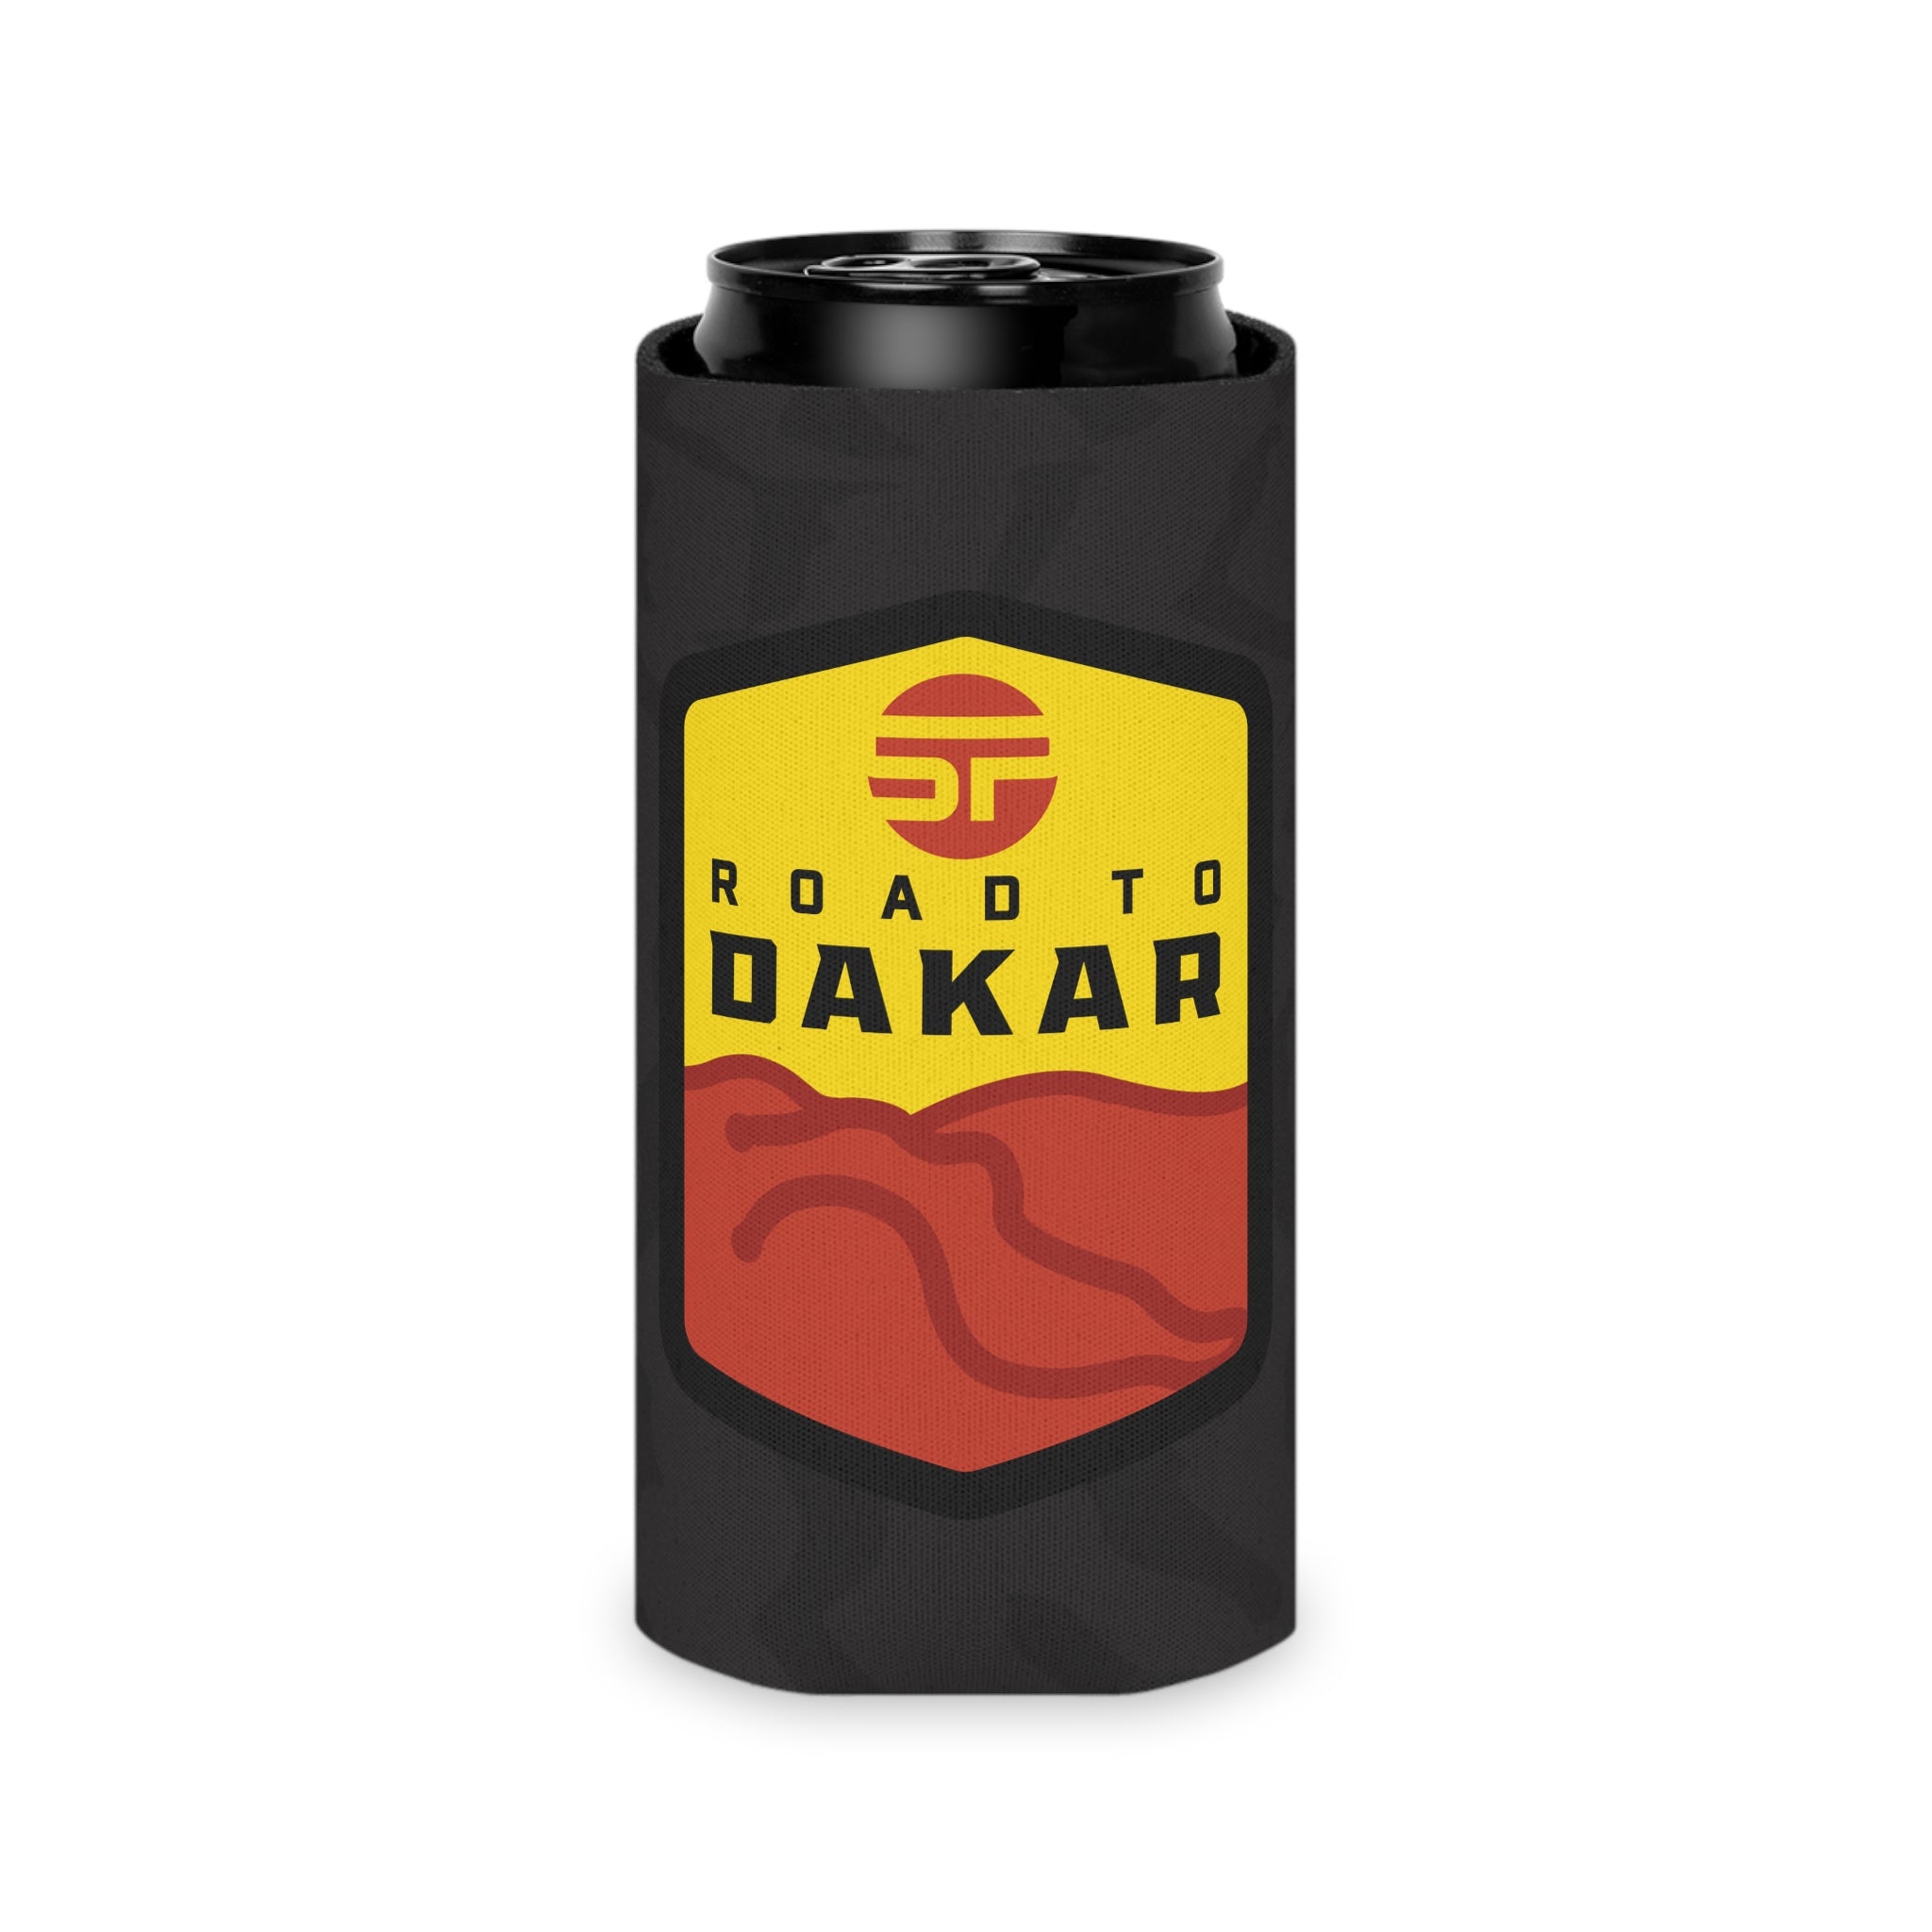 Road to Dakar Coozie Short and Tall